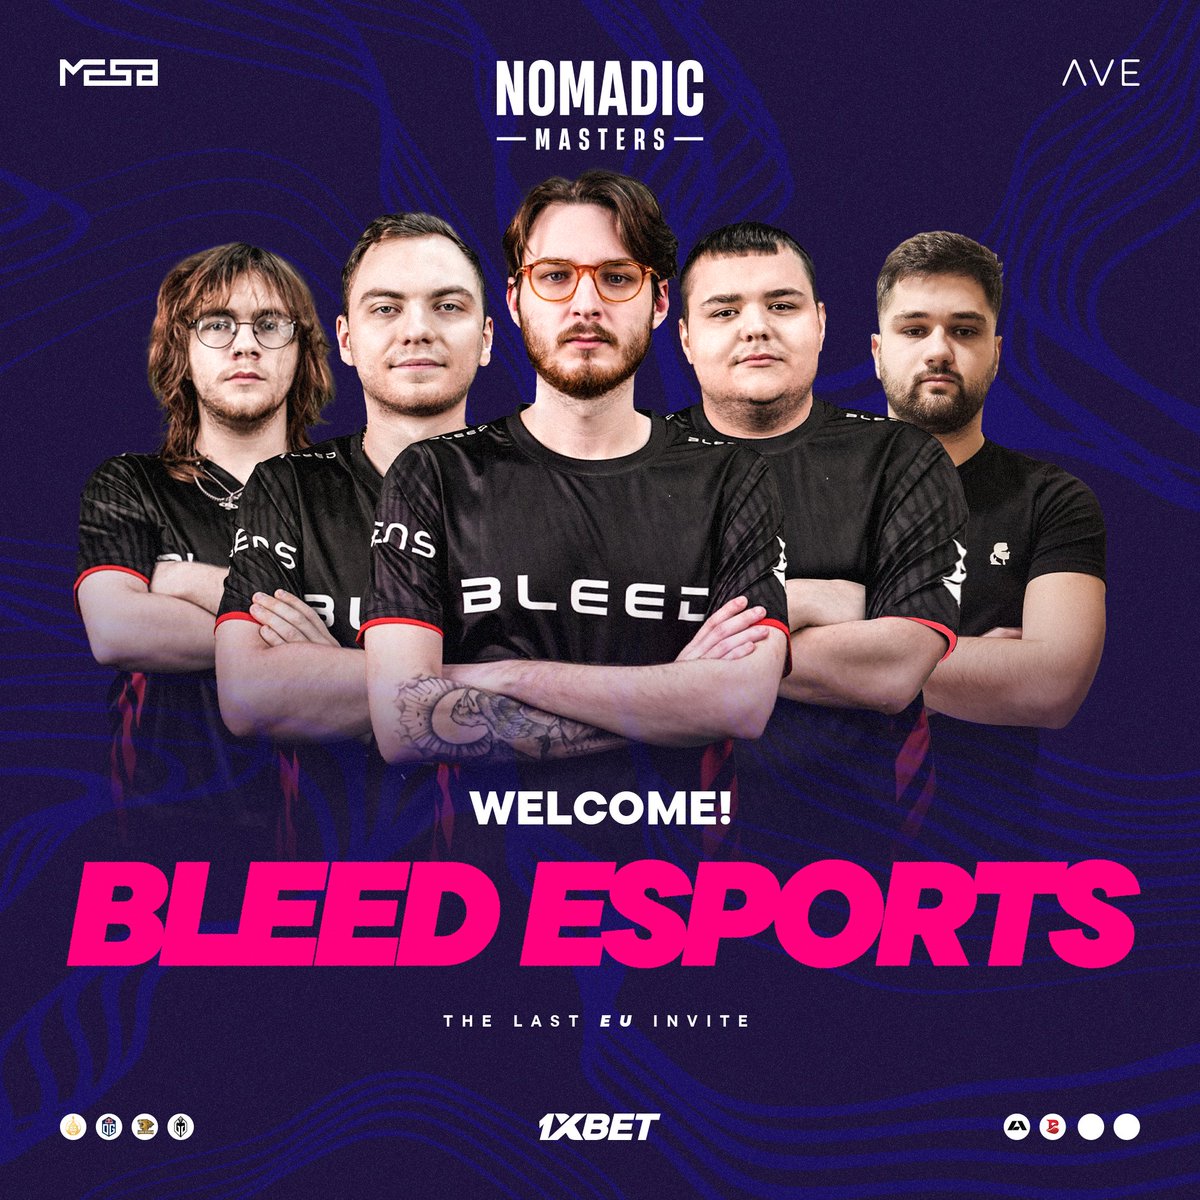 Announcing the European fourth invitee of the Nomadic Masters: @ggBleed ! As the European invitee to the upcoming Nomadic Masters Spring 24 tournament in Ulaanbaatar, Mongolia, they're poised to make history once again from May 28 to June 2. Meet the marvellous lineup: 🇸🇪…